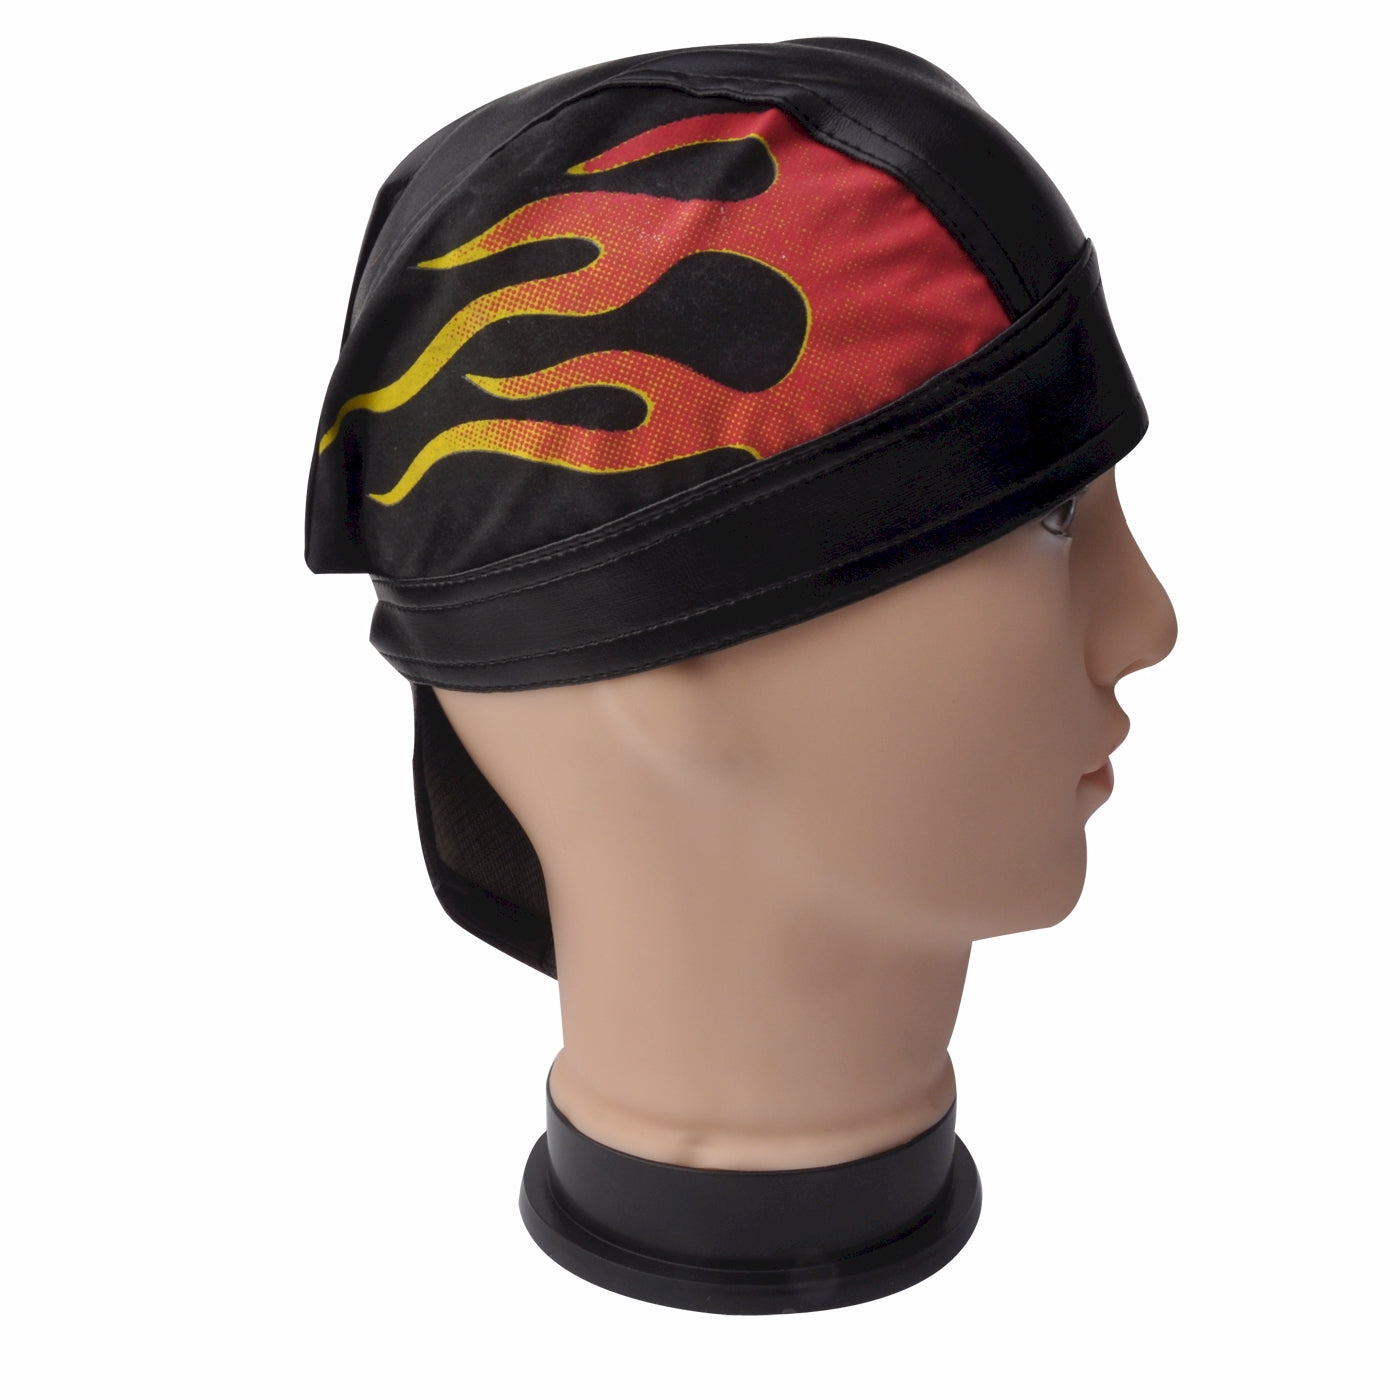 Red Flame Skull Cap - aomega-products